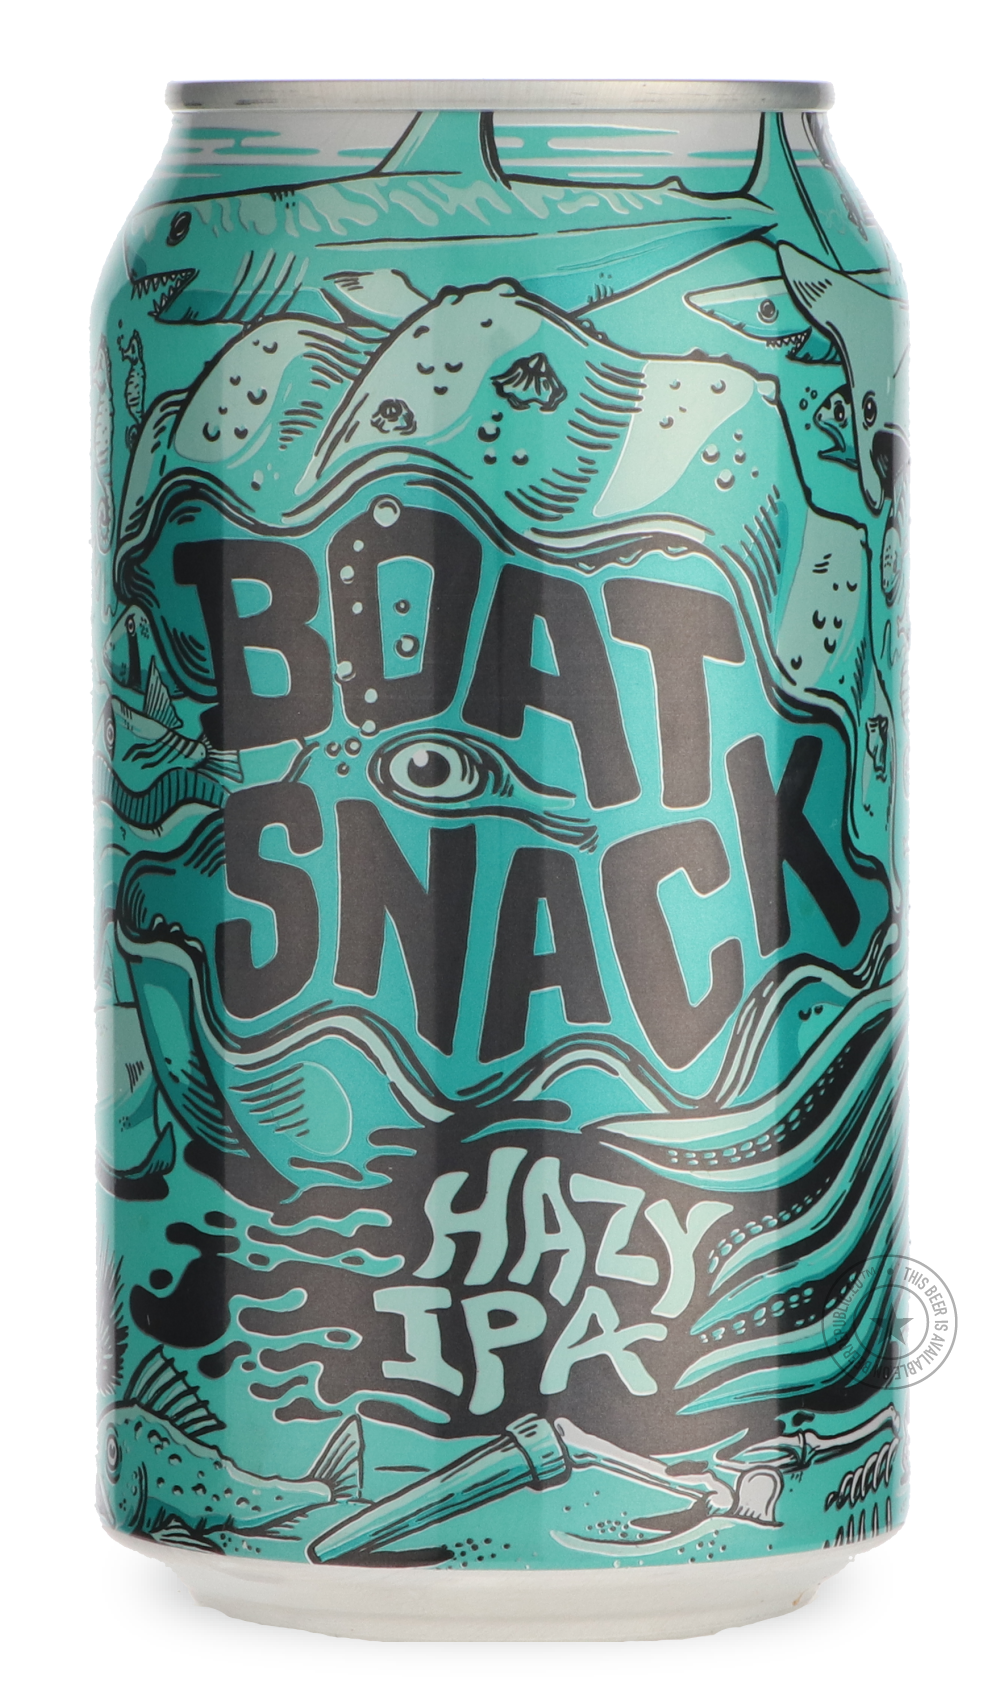 -Bootstrap- Boat Snack-IPA- Only @ Beer Republic - The best online beer store for American & Canadian craft beer - Buy beer online from the USA and Canada - Bier online kopen - Amerikaans bier kopen - Craft beer store - Craft beer kopen - Amerikanisch bier kaufen - Bier online kaufen - Acheter biere online - IPA - Stout - Porter - New England IPA - Hazy IPA - Imperial Stout - Barrel Aged - Barrel Aged Imperial Stout - Brown - Dark beer - Blond - Blonde - Pilsner - Lager - Wheat - Weizen - Amber - Barley Win